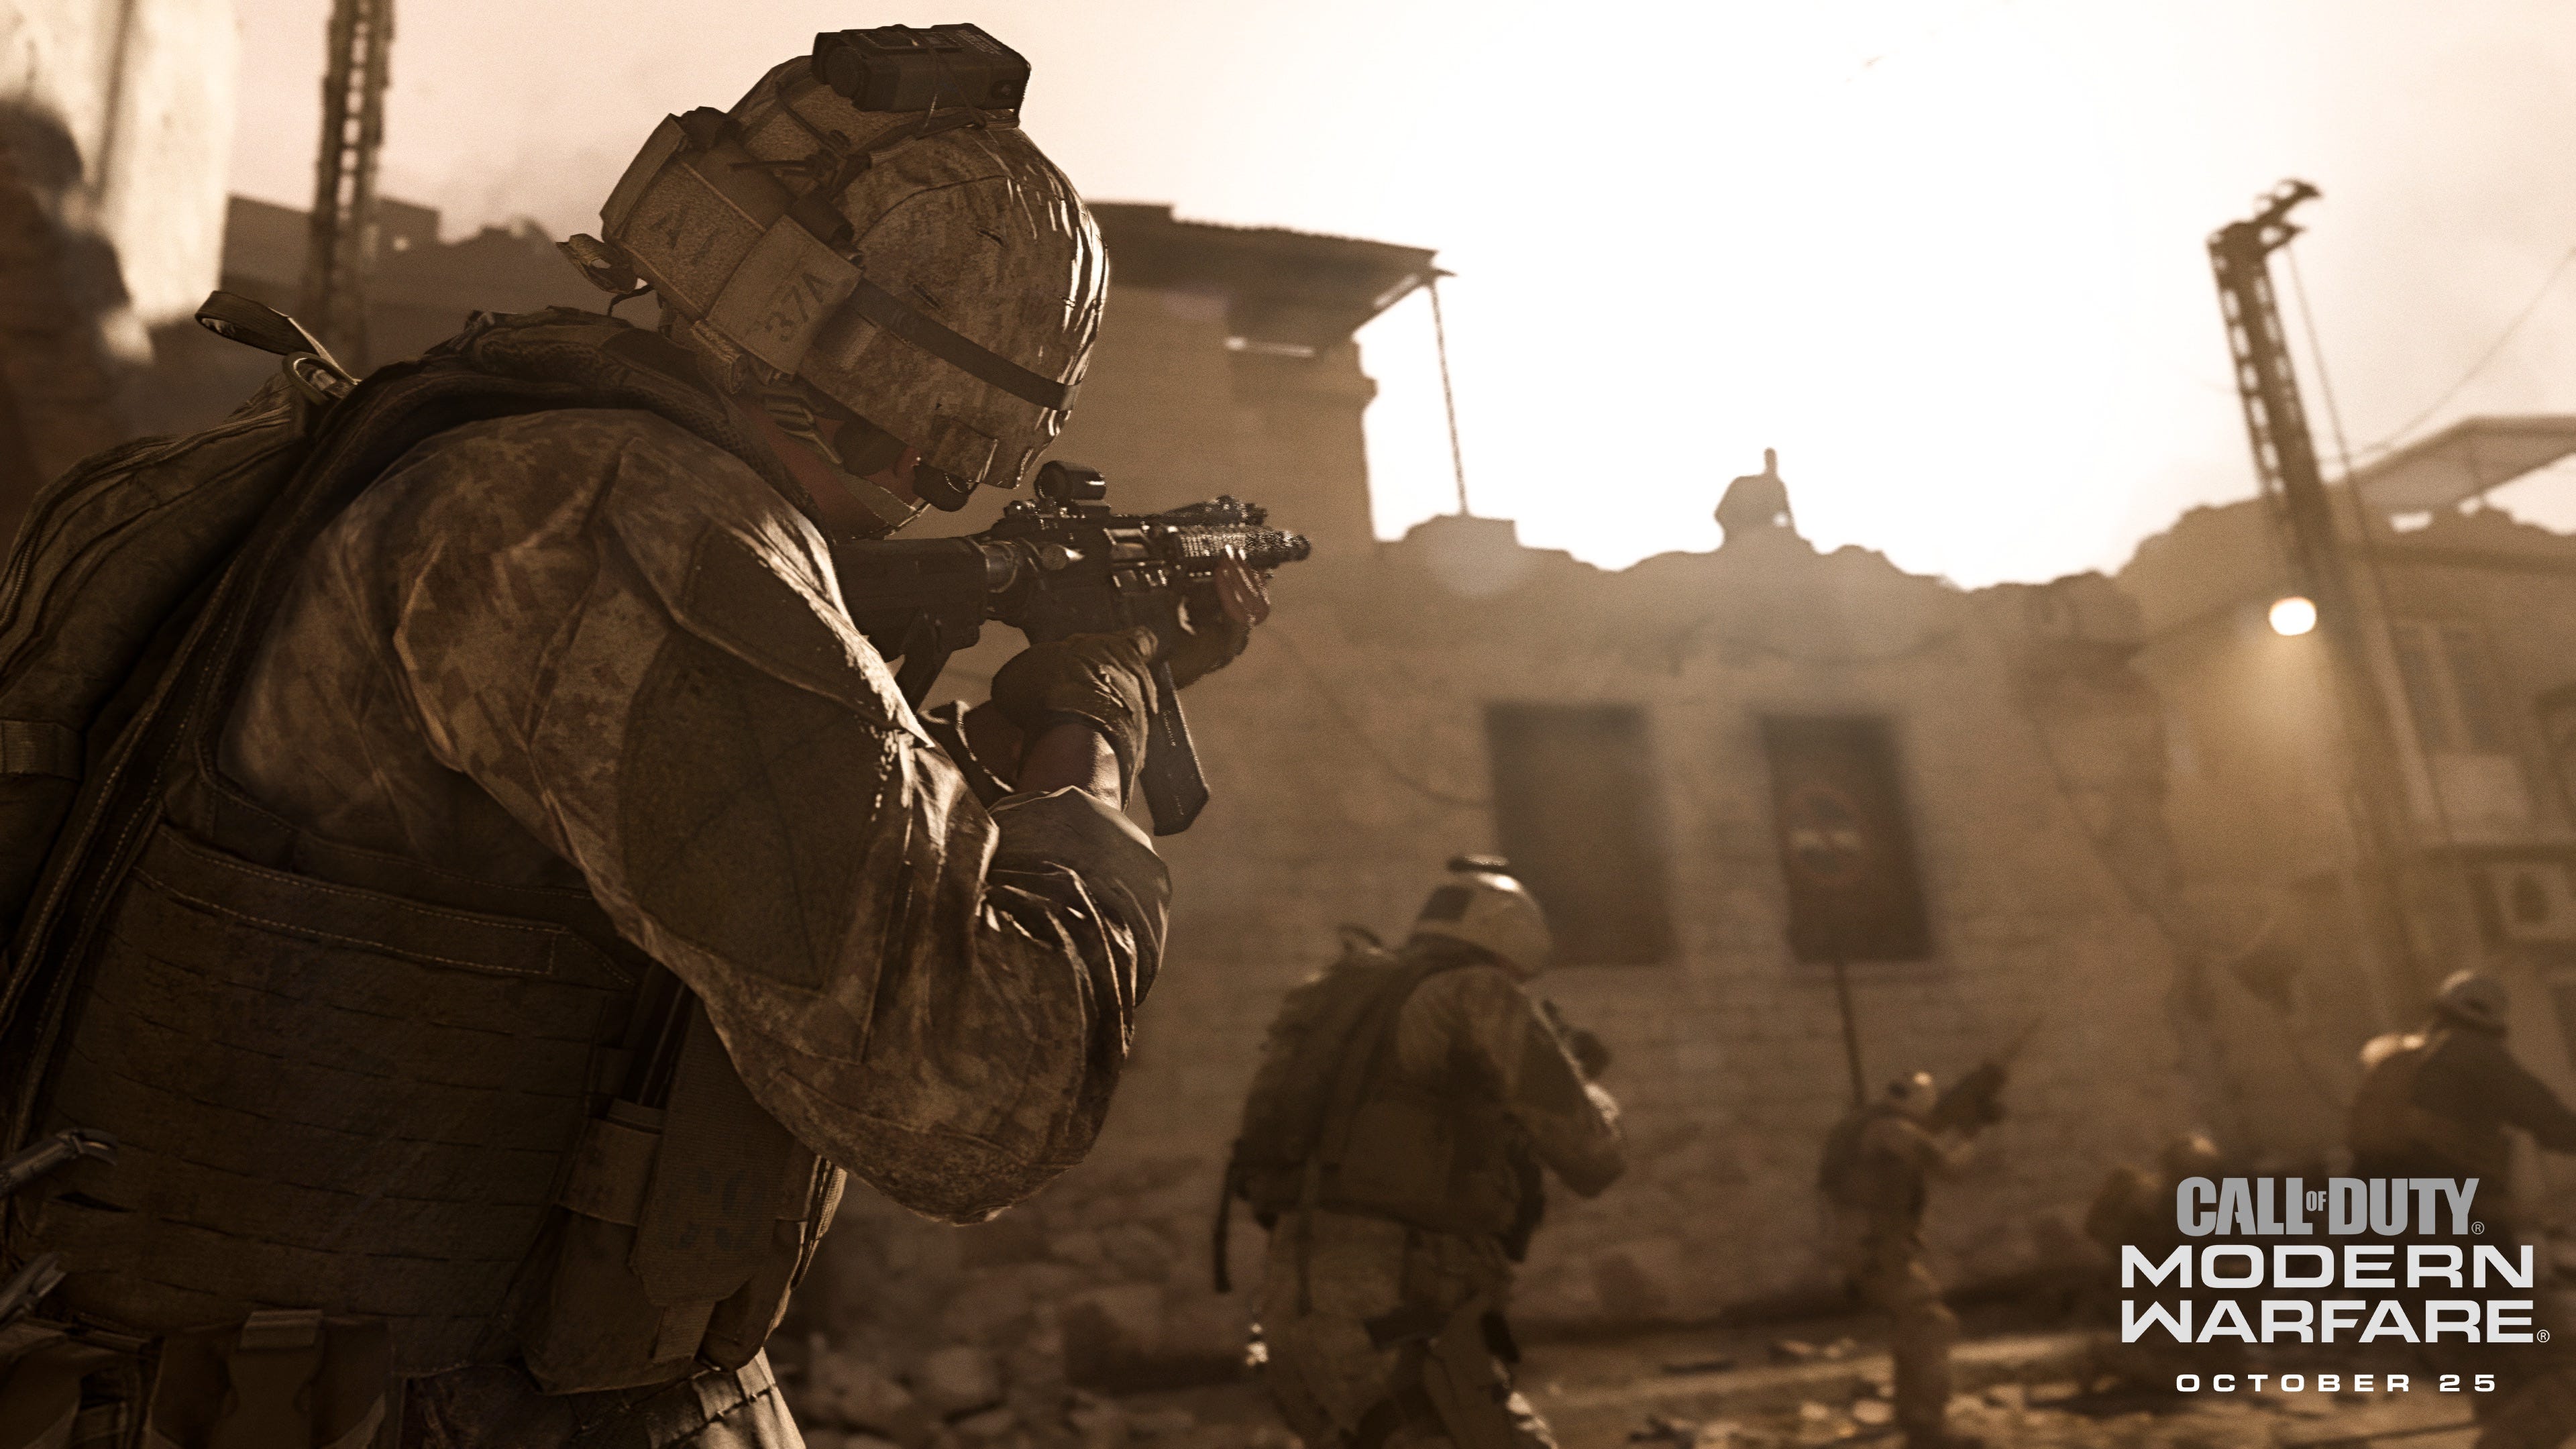 Call of Duty: Modern Warfare': Video game takes realism to ... - 